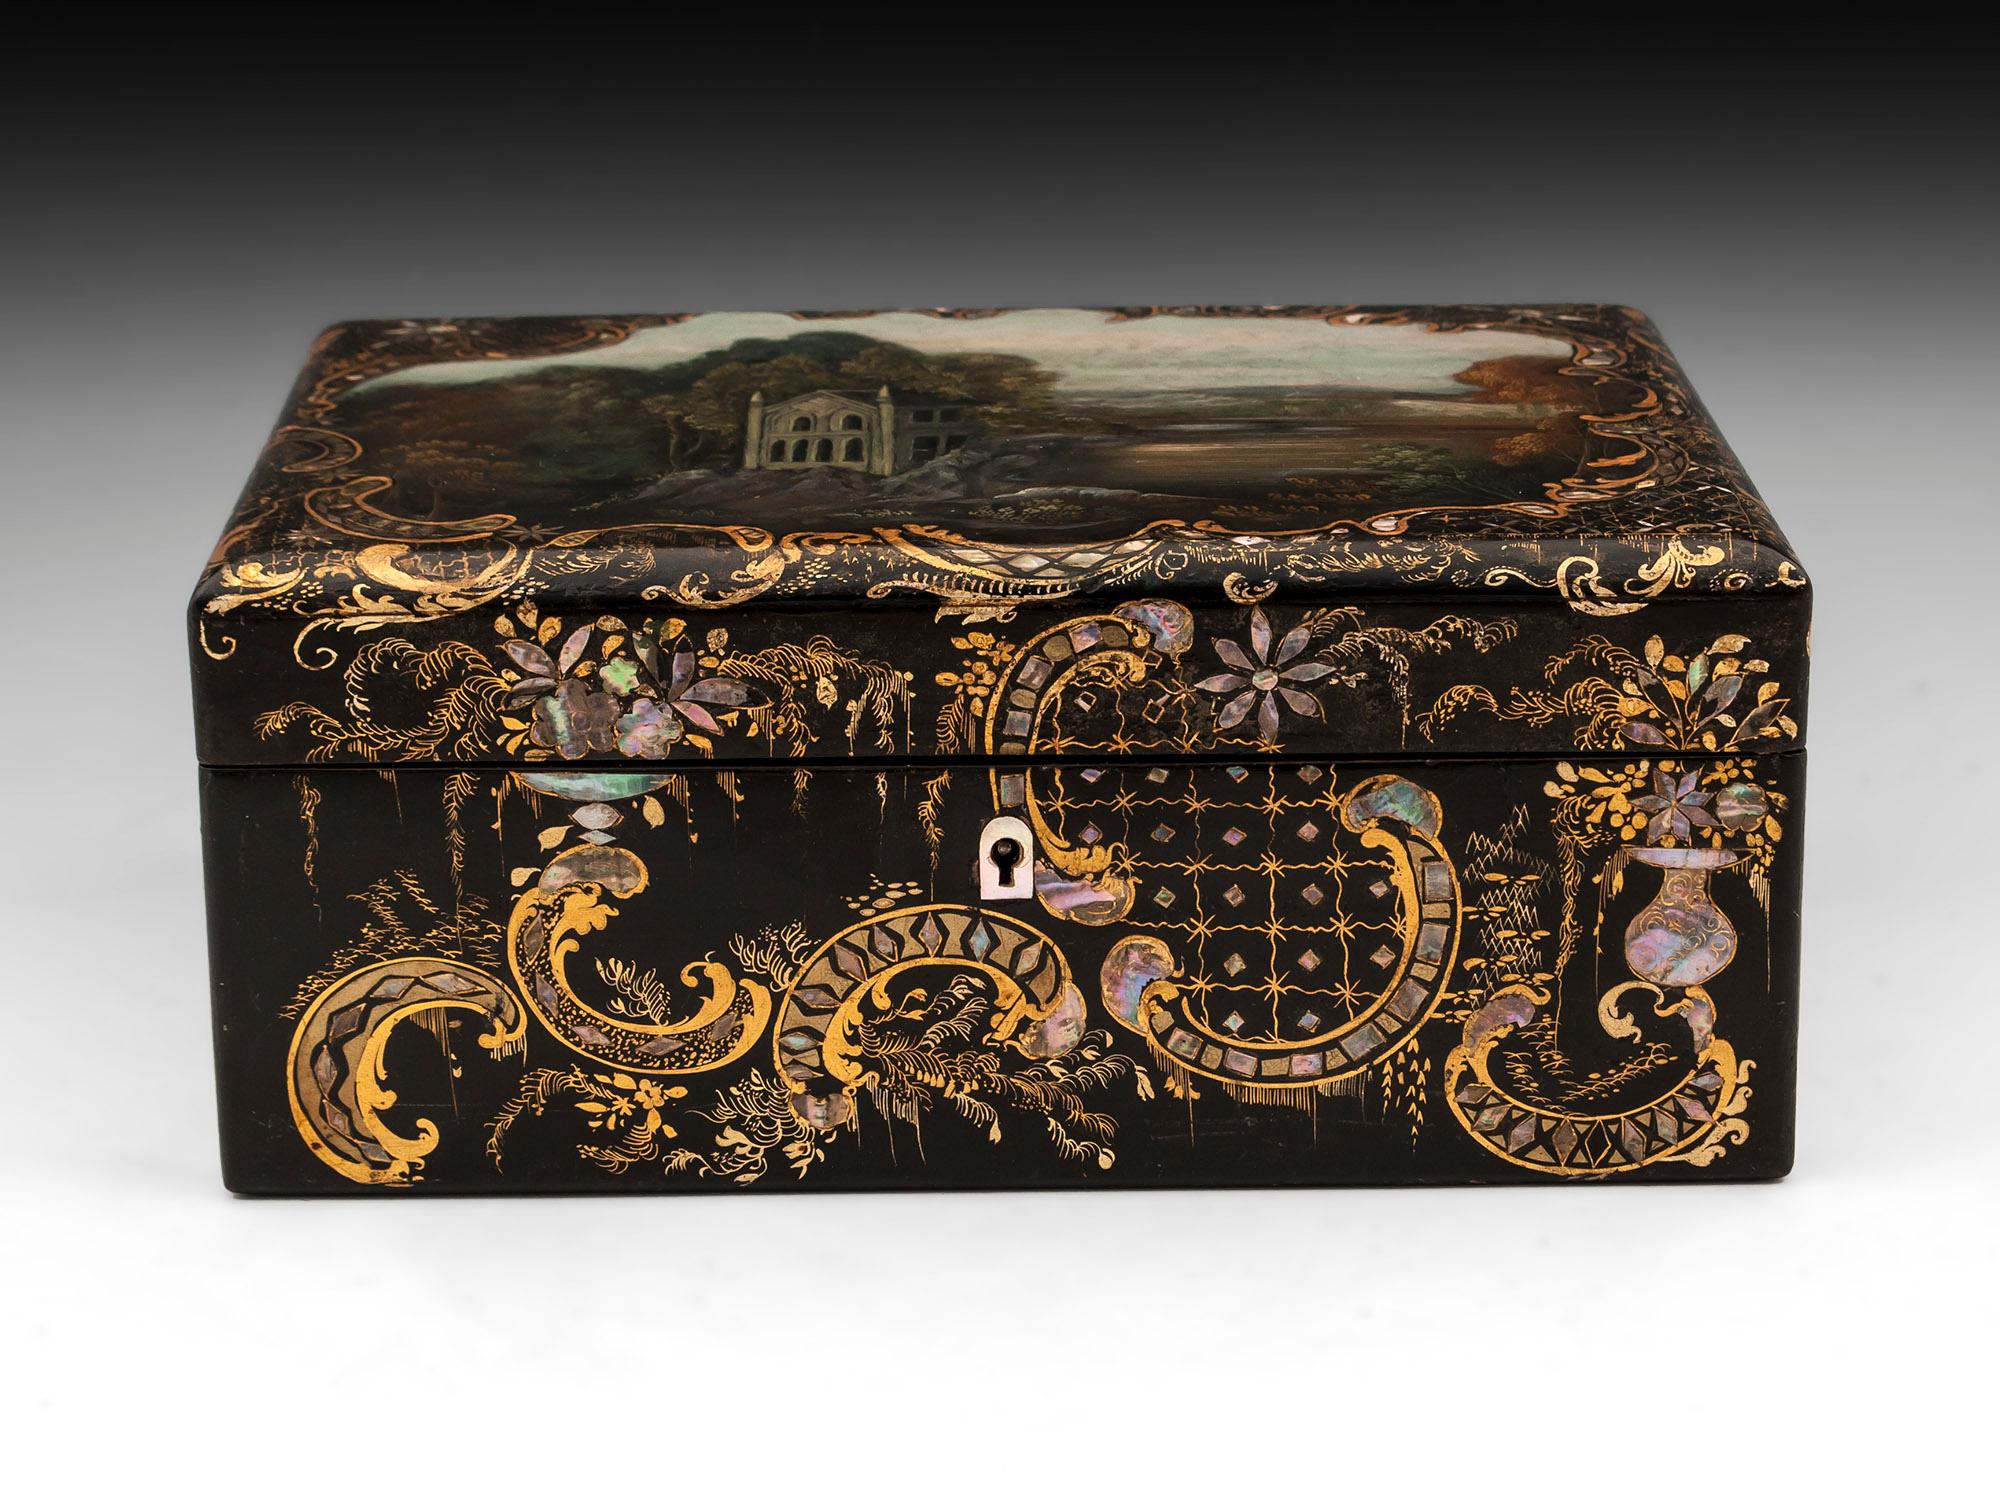 Papier mâché sewing box beautifully painted with a landscape scene, bordered by gold floral designs adorned with inlaid abalone. 

The interior is lined with red silk velvet and features a removable tray which houses various sewing tools including